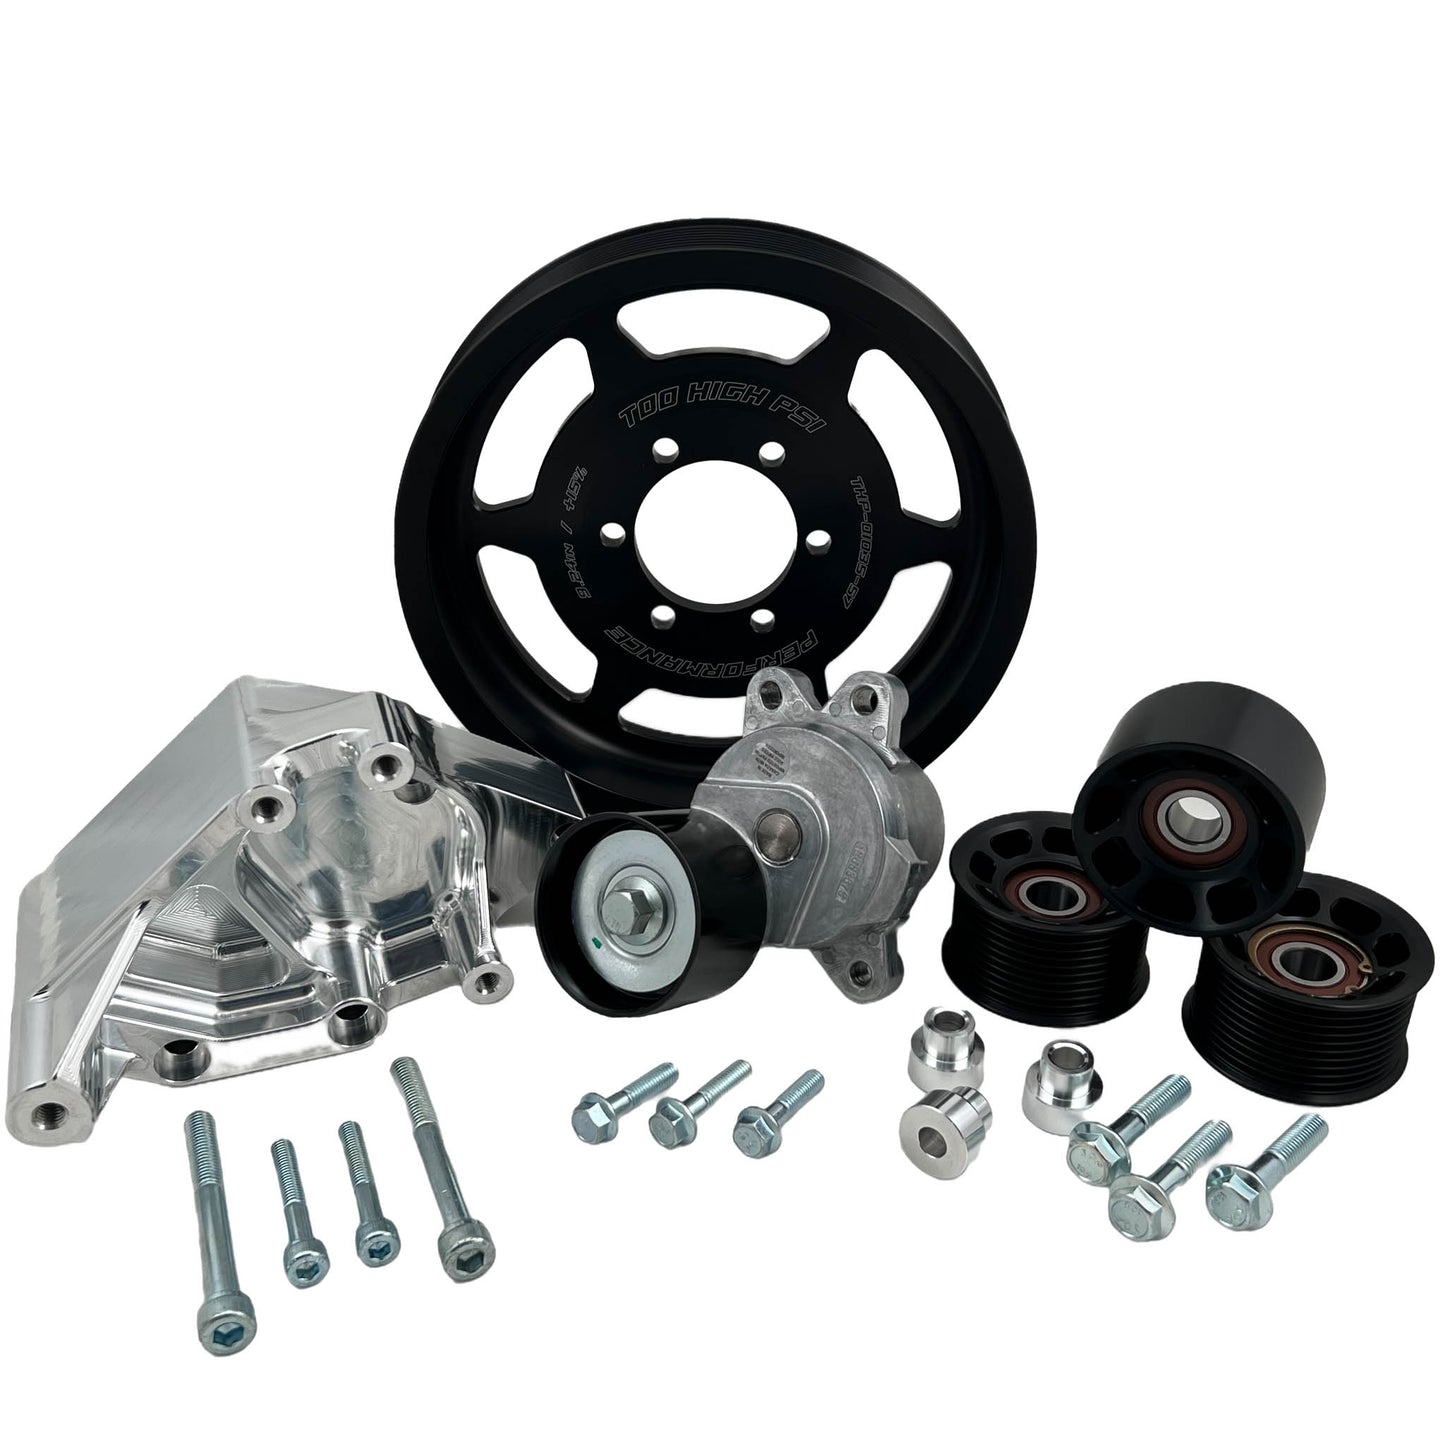 Camaro/CTSV - LT1/LT4 10 rib Supercharger Drive Package - includes +15% or +28% Lower Pulley